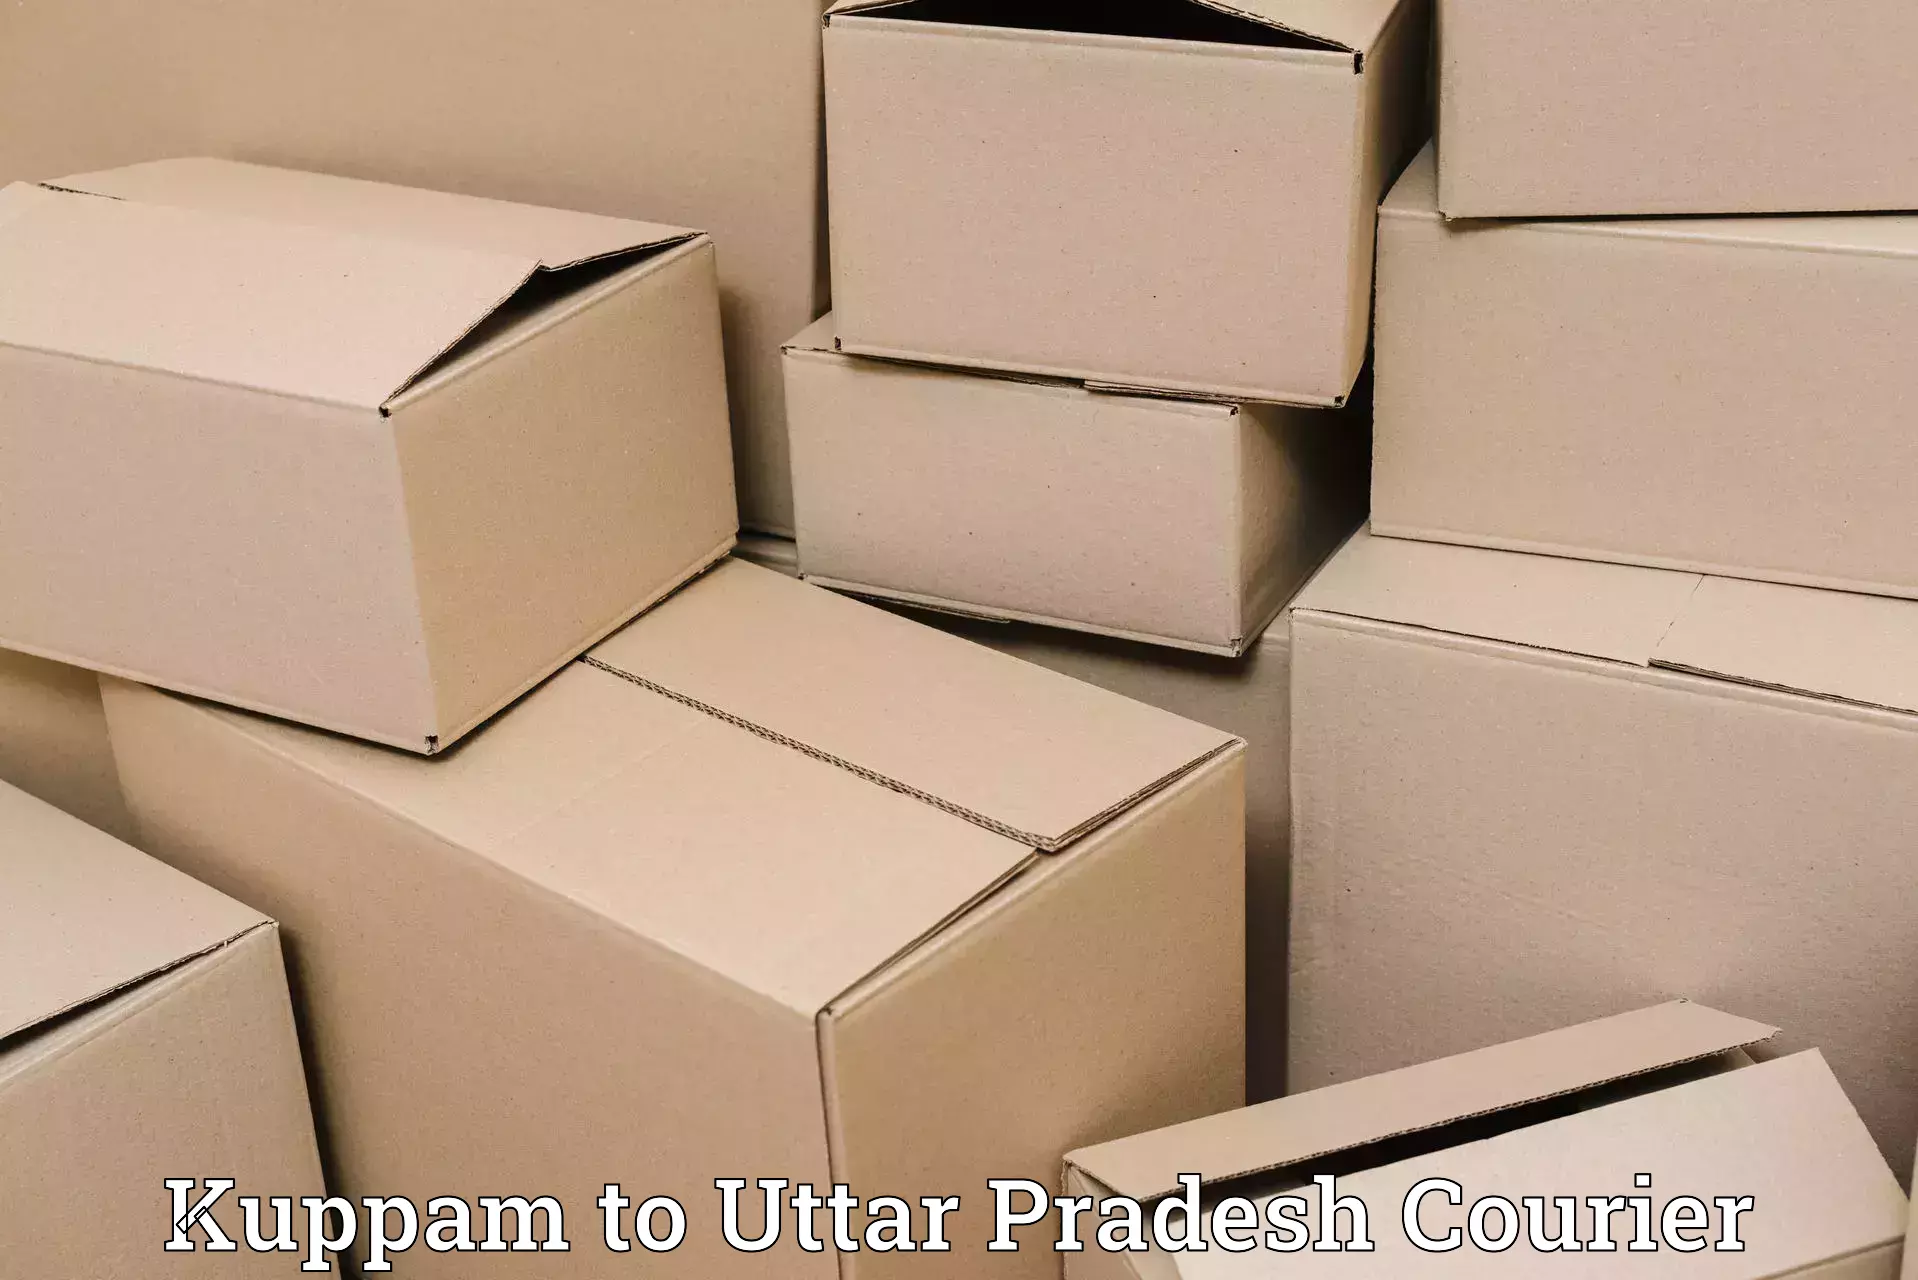 Holiday shipping services Kuppam to Aligarh